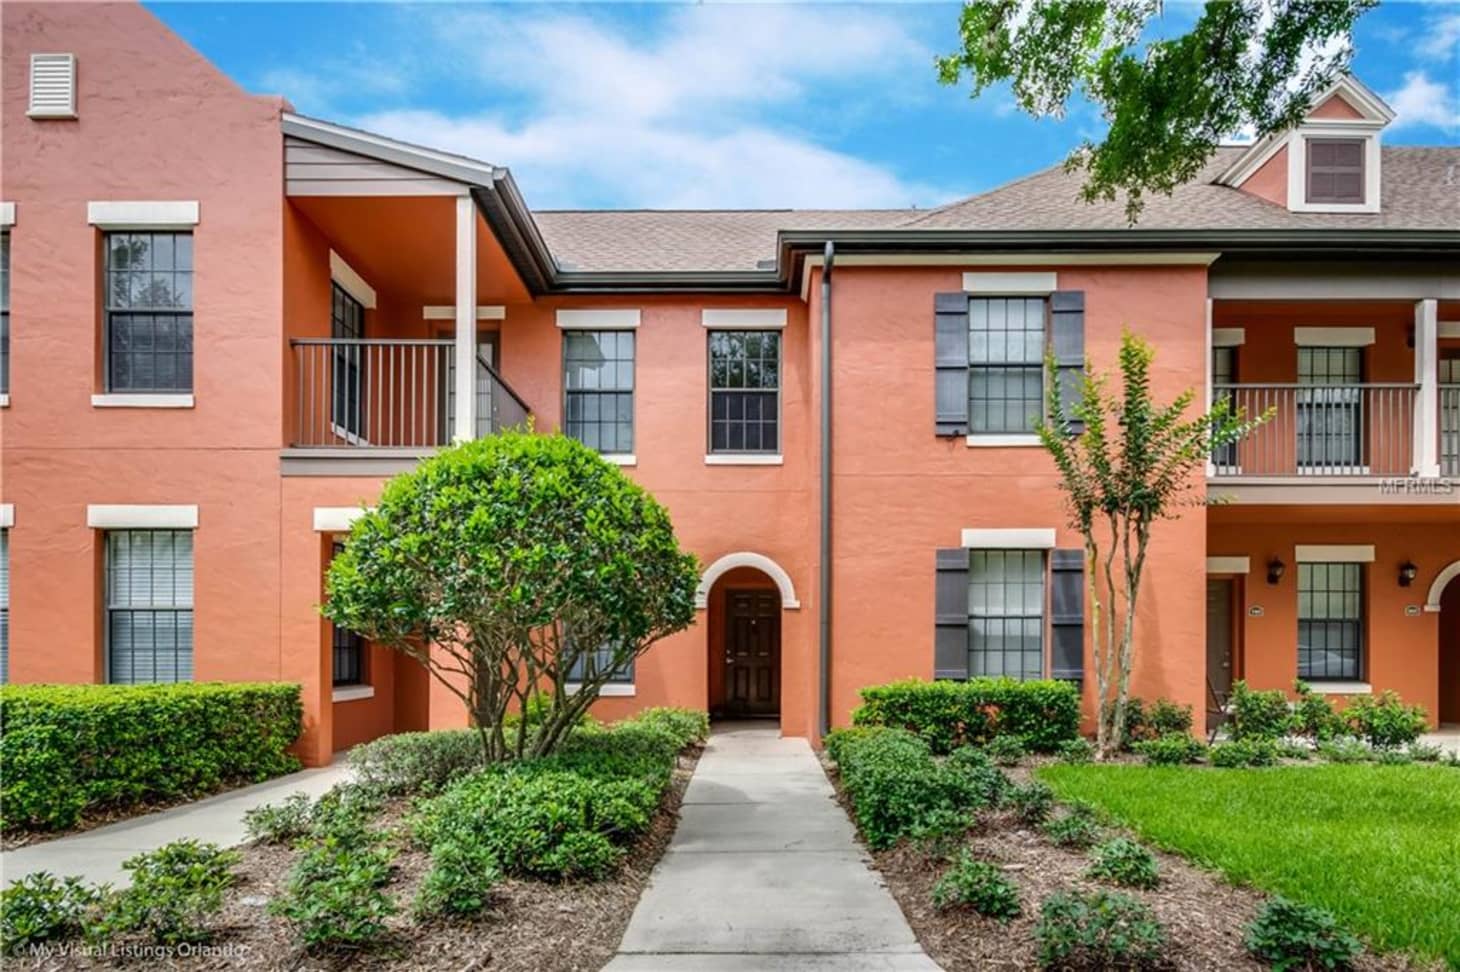 The Cost Of Living In Orlando Near Disney World Apartment Therapy